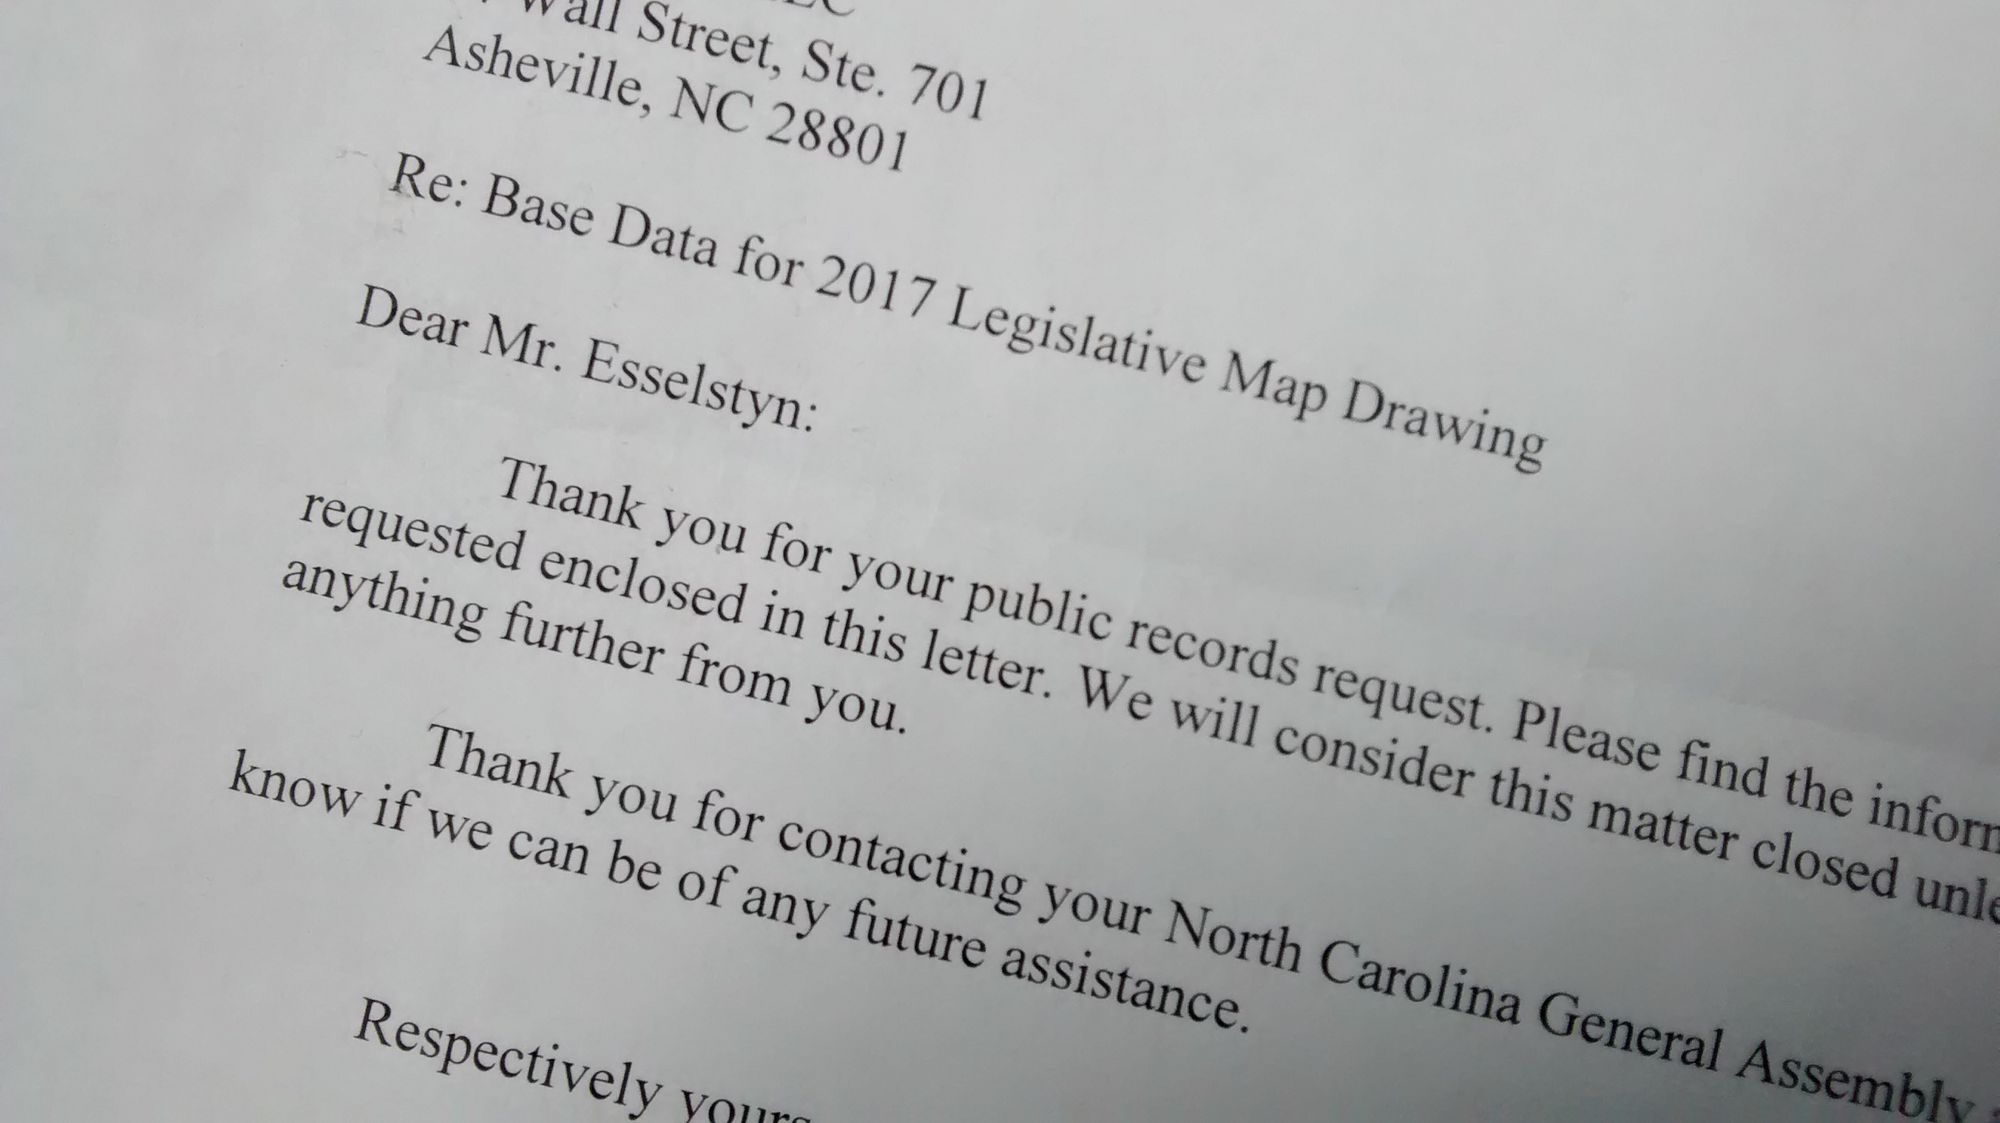 Important Redistricting Data is Missing from the NCGA Website